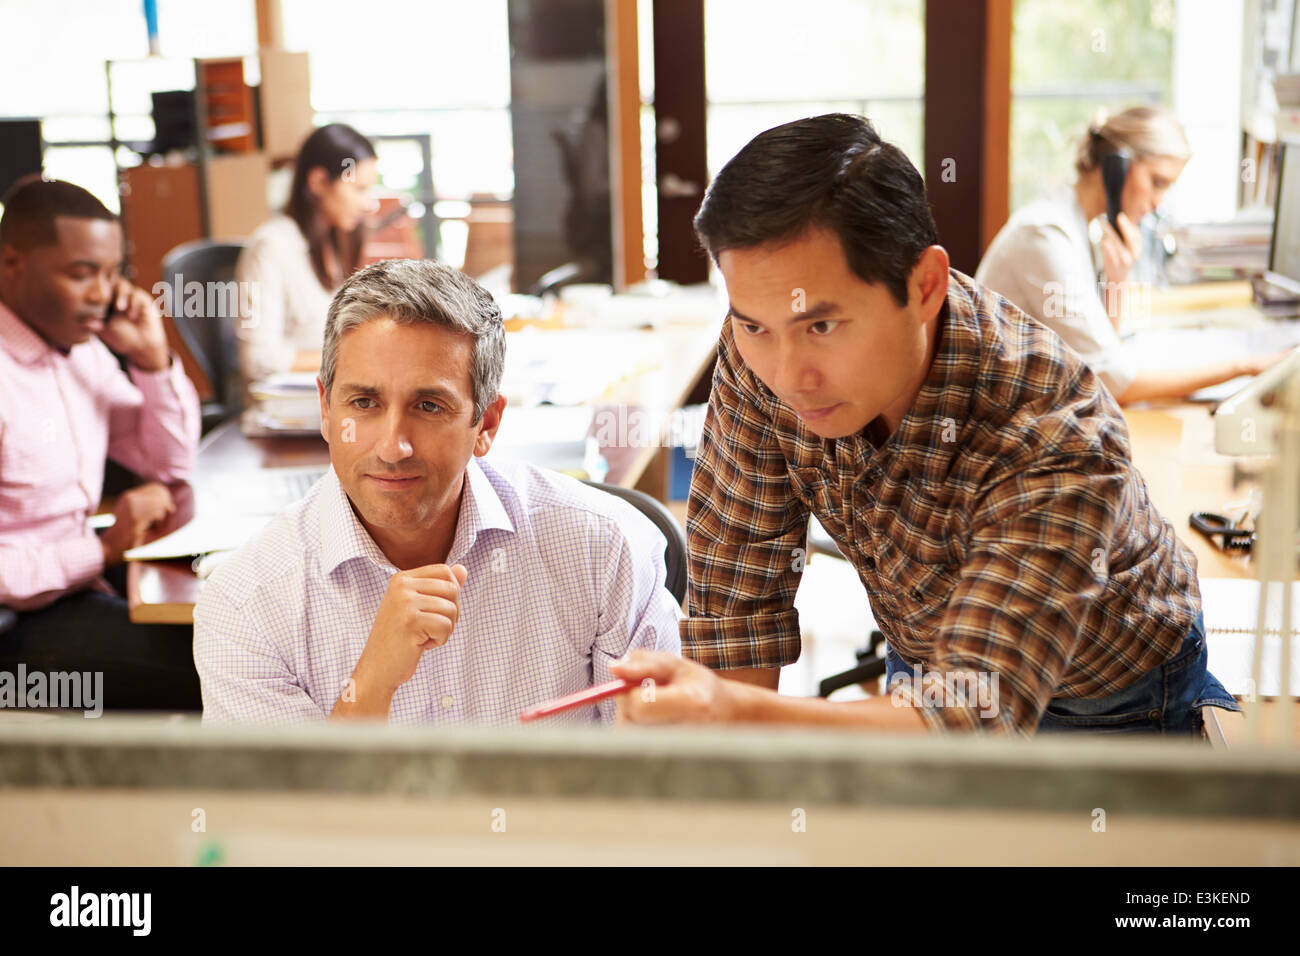 Two Colleagues Working At Desk With Meeting In Background Stock Photo